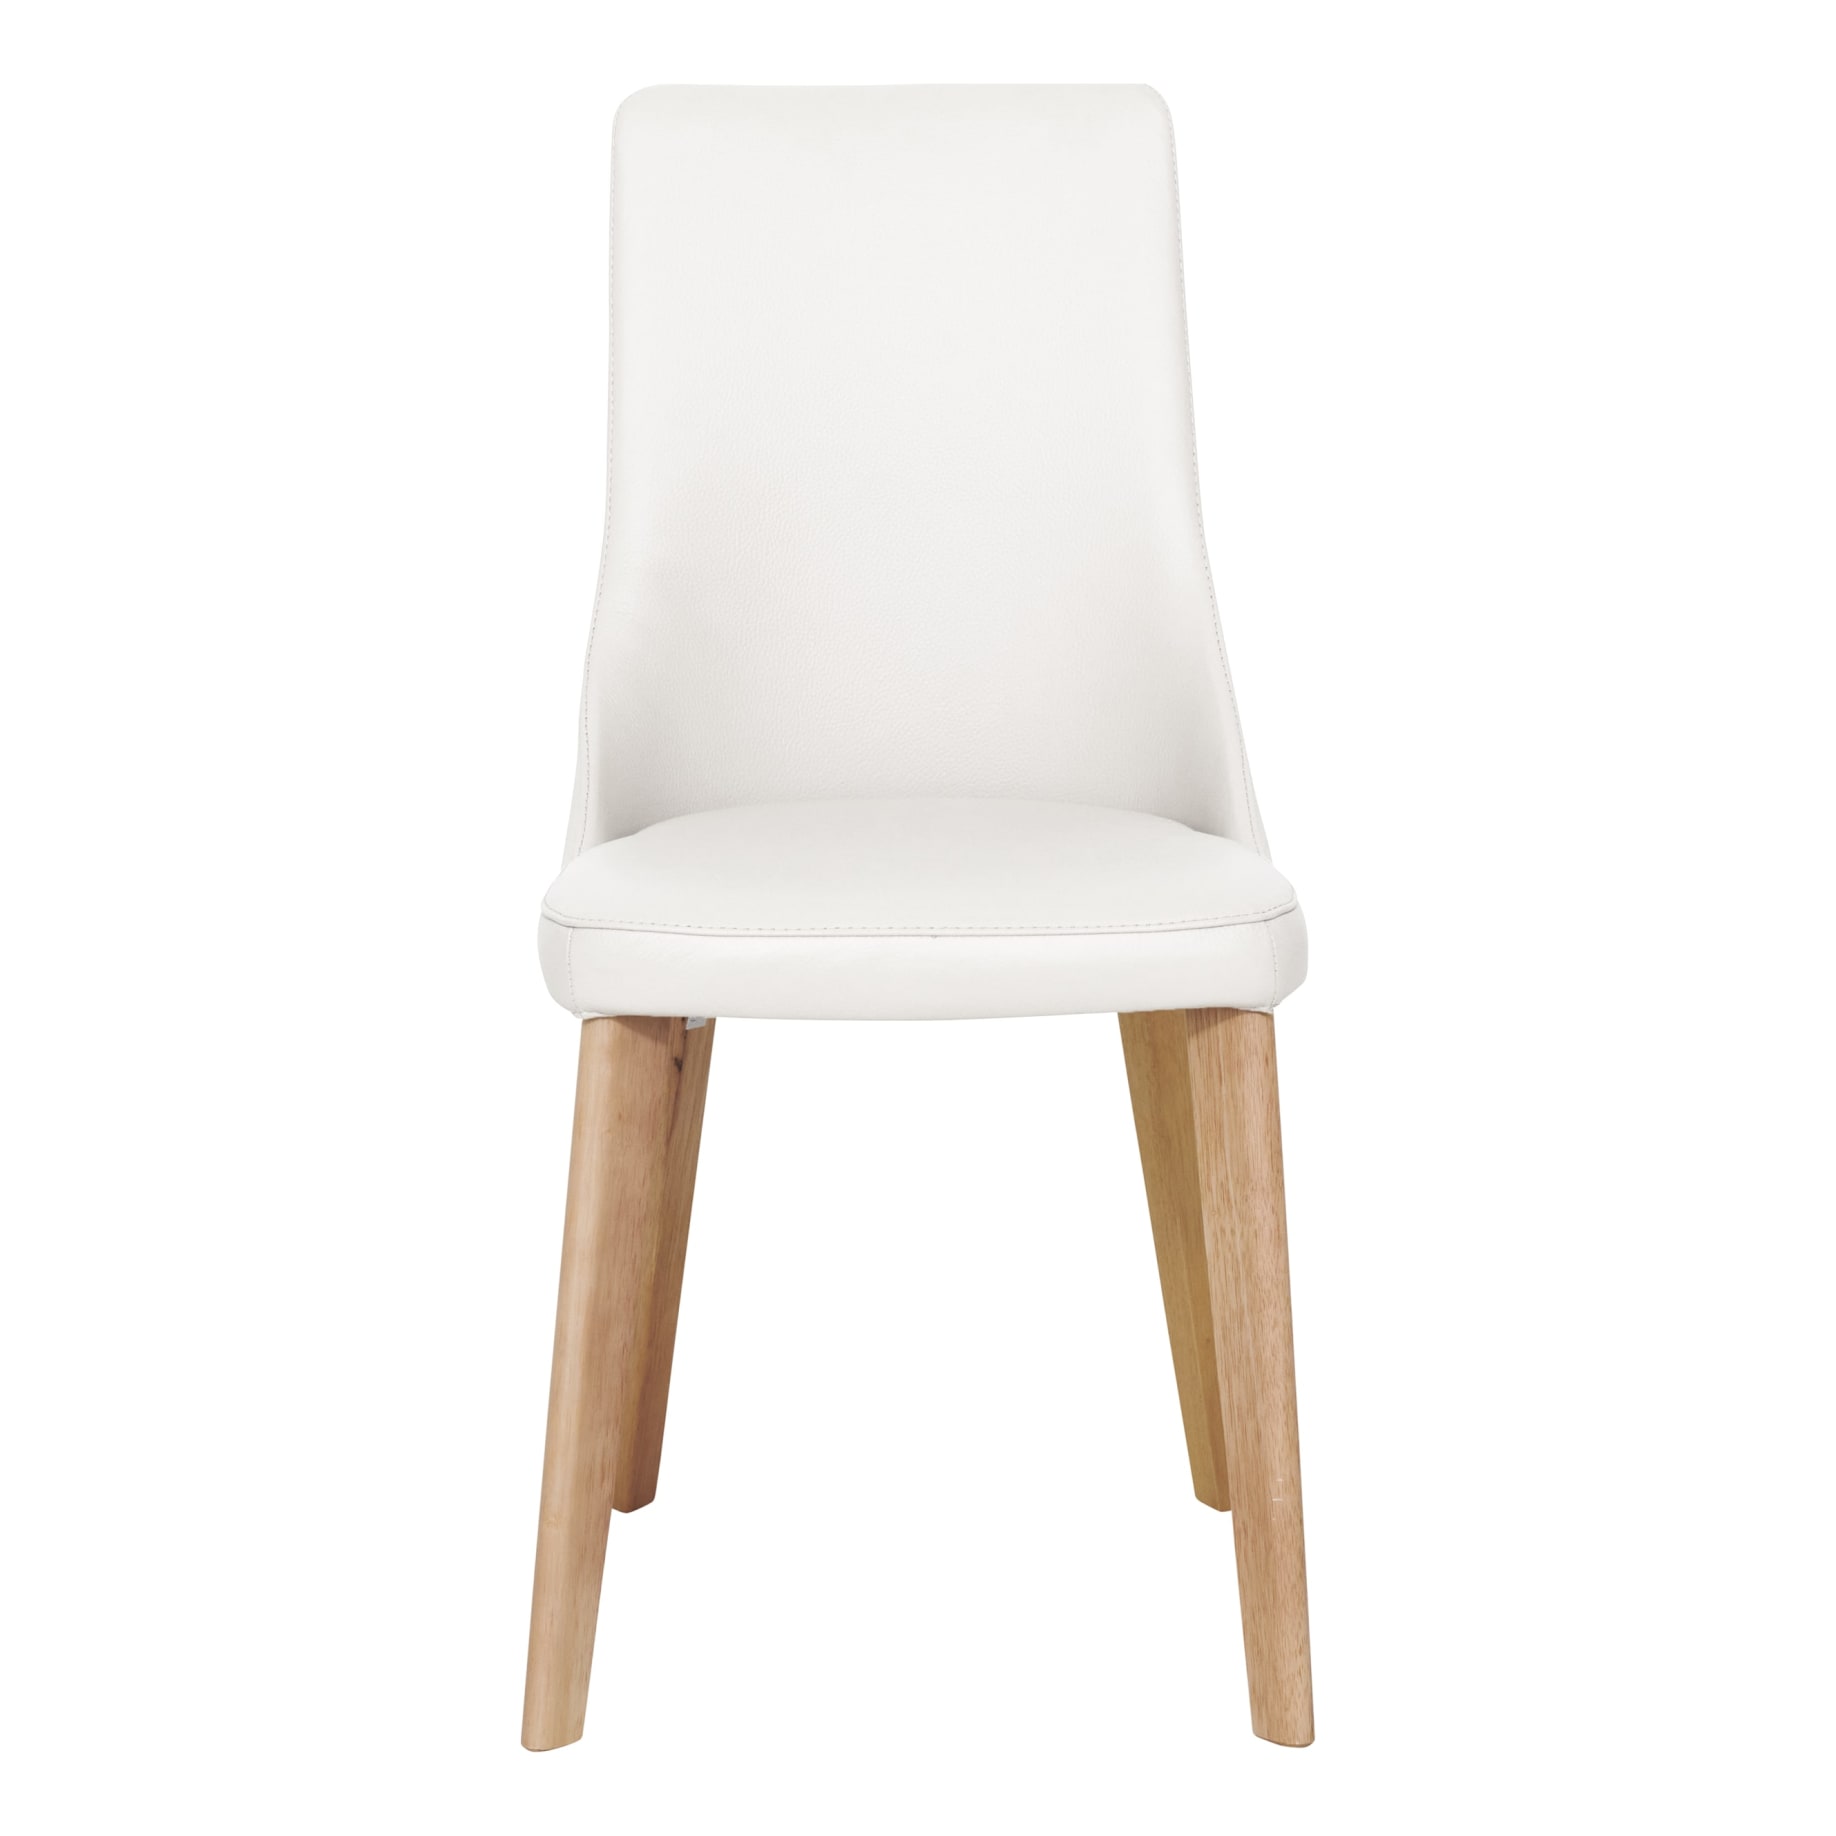 Panama Dining Chair in Pure White / Oak Stain